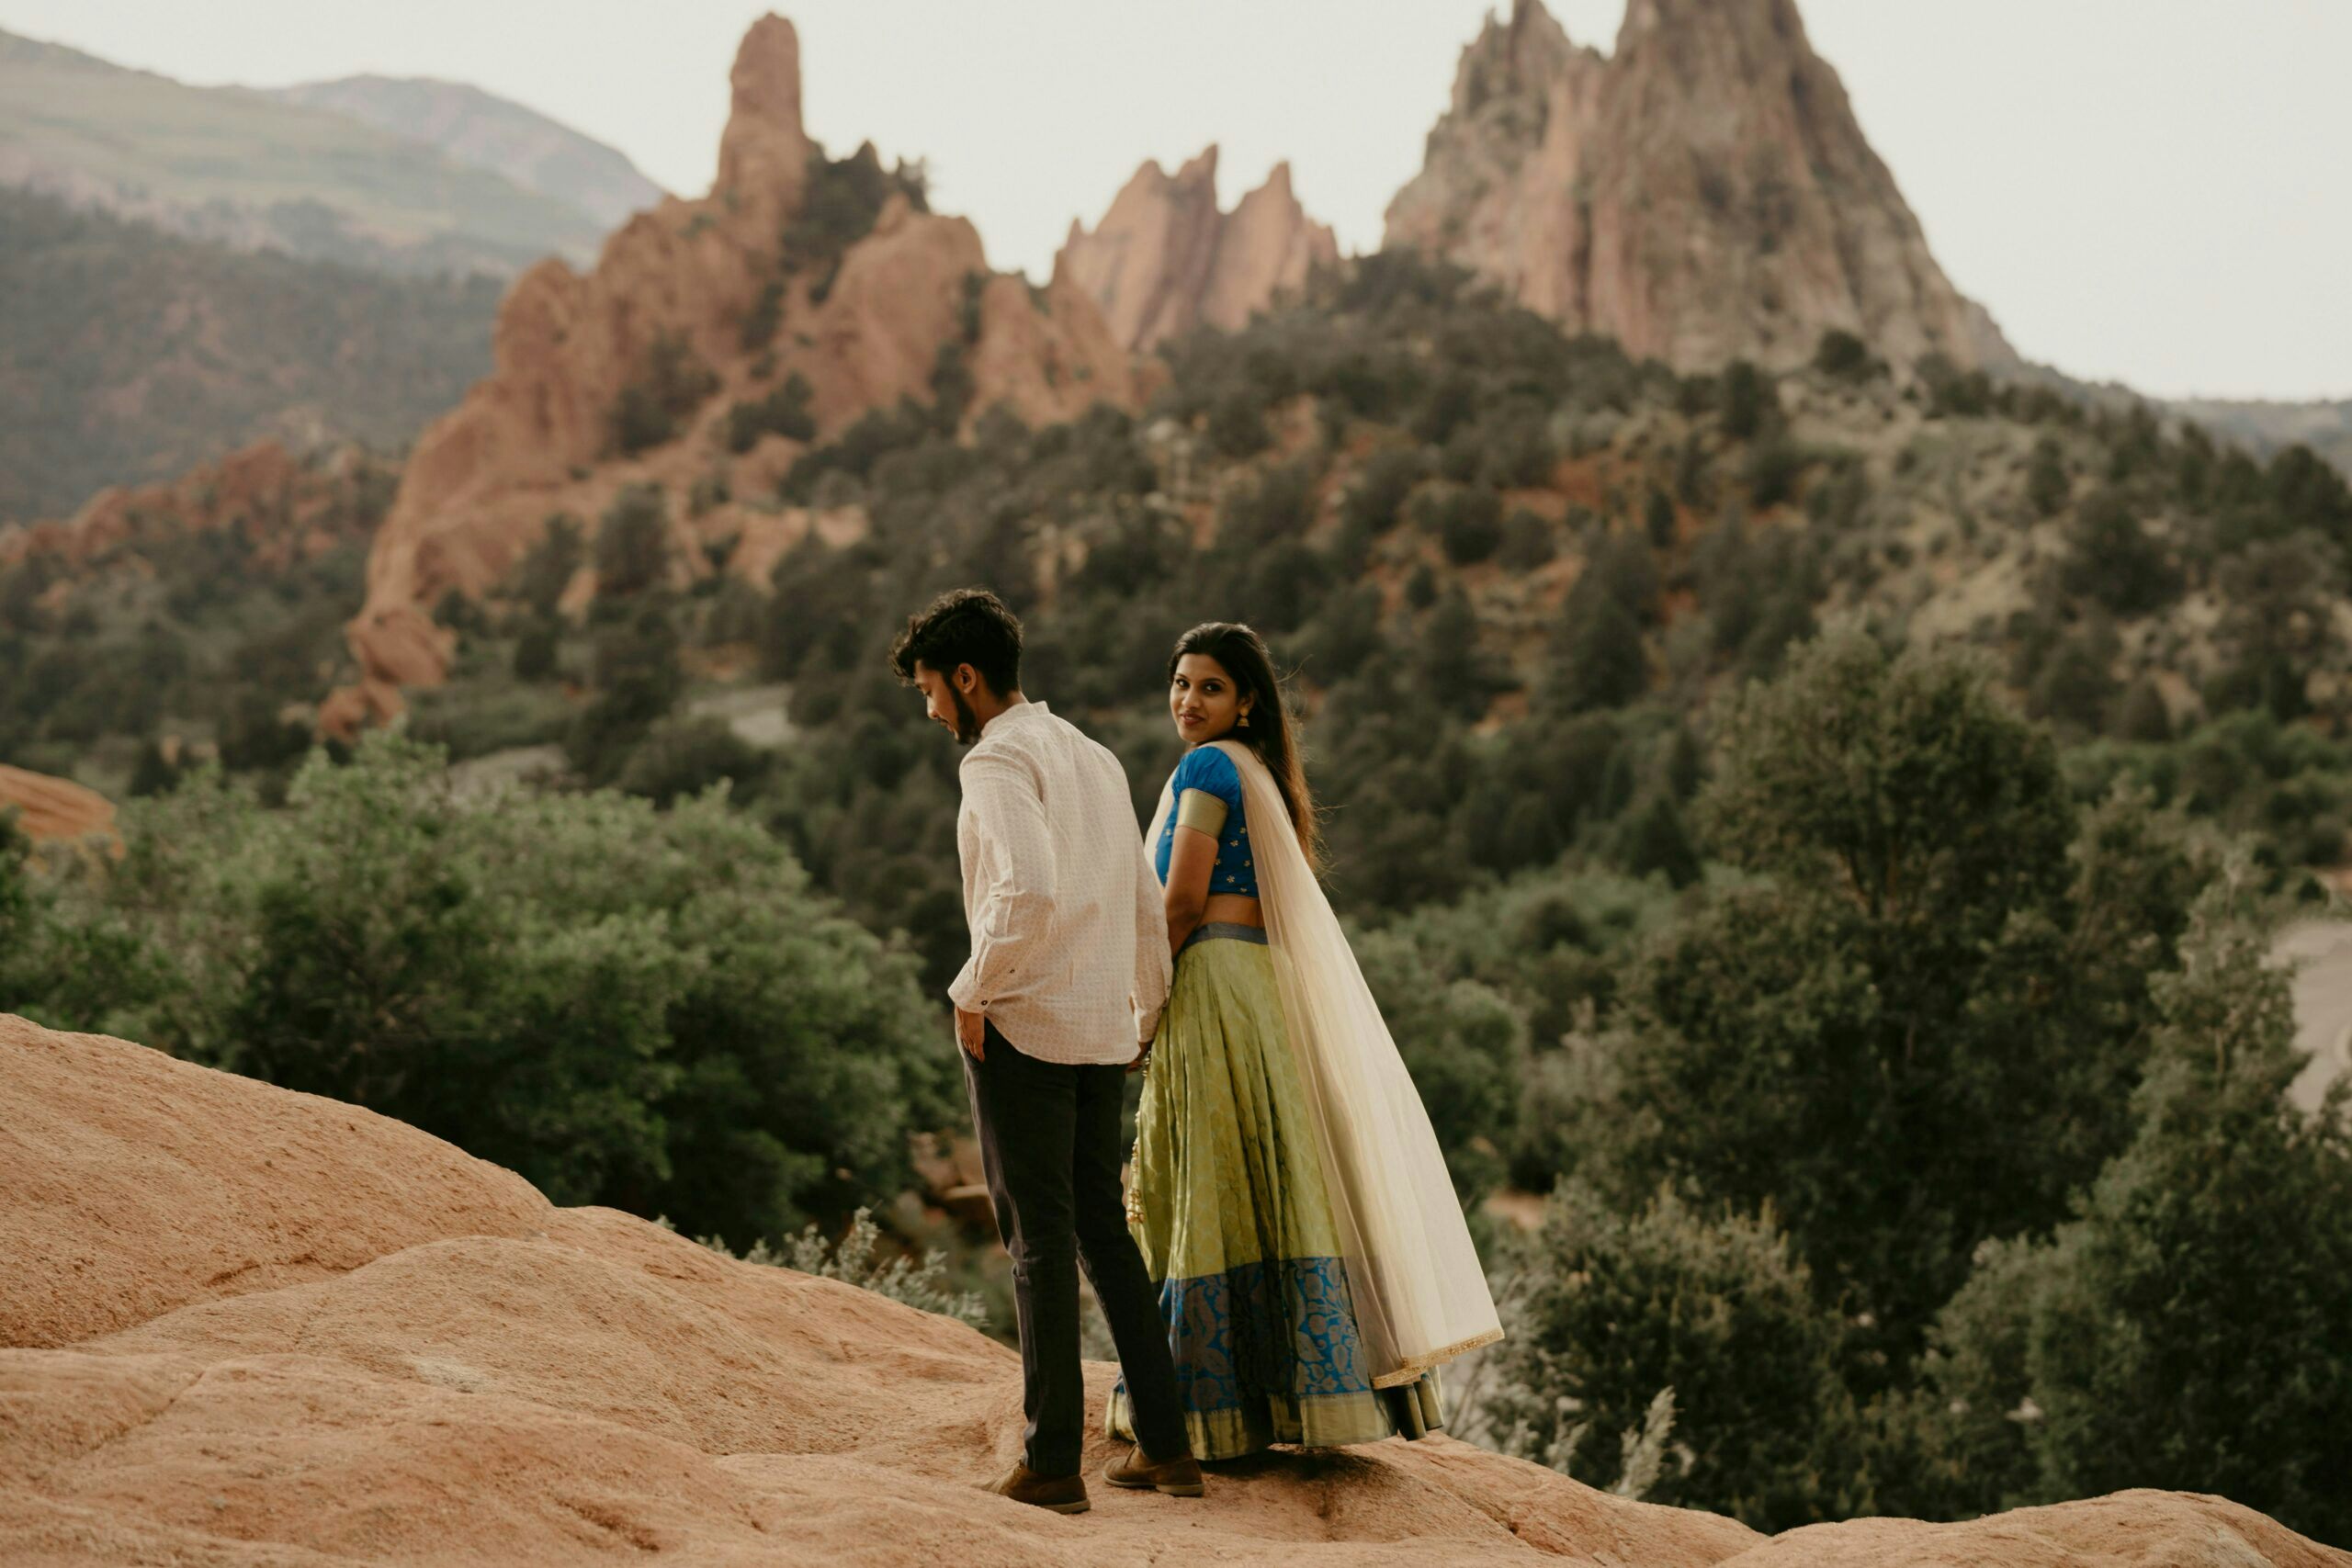 How to Plan the Most Perfect Engagement Proposal on a Special Trip